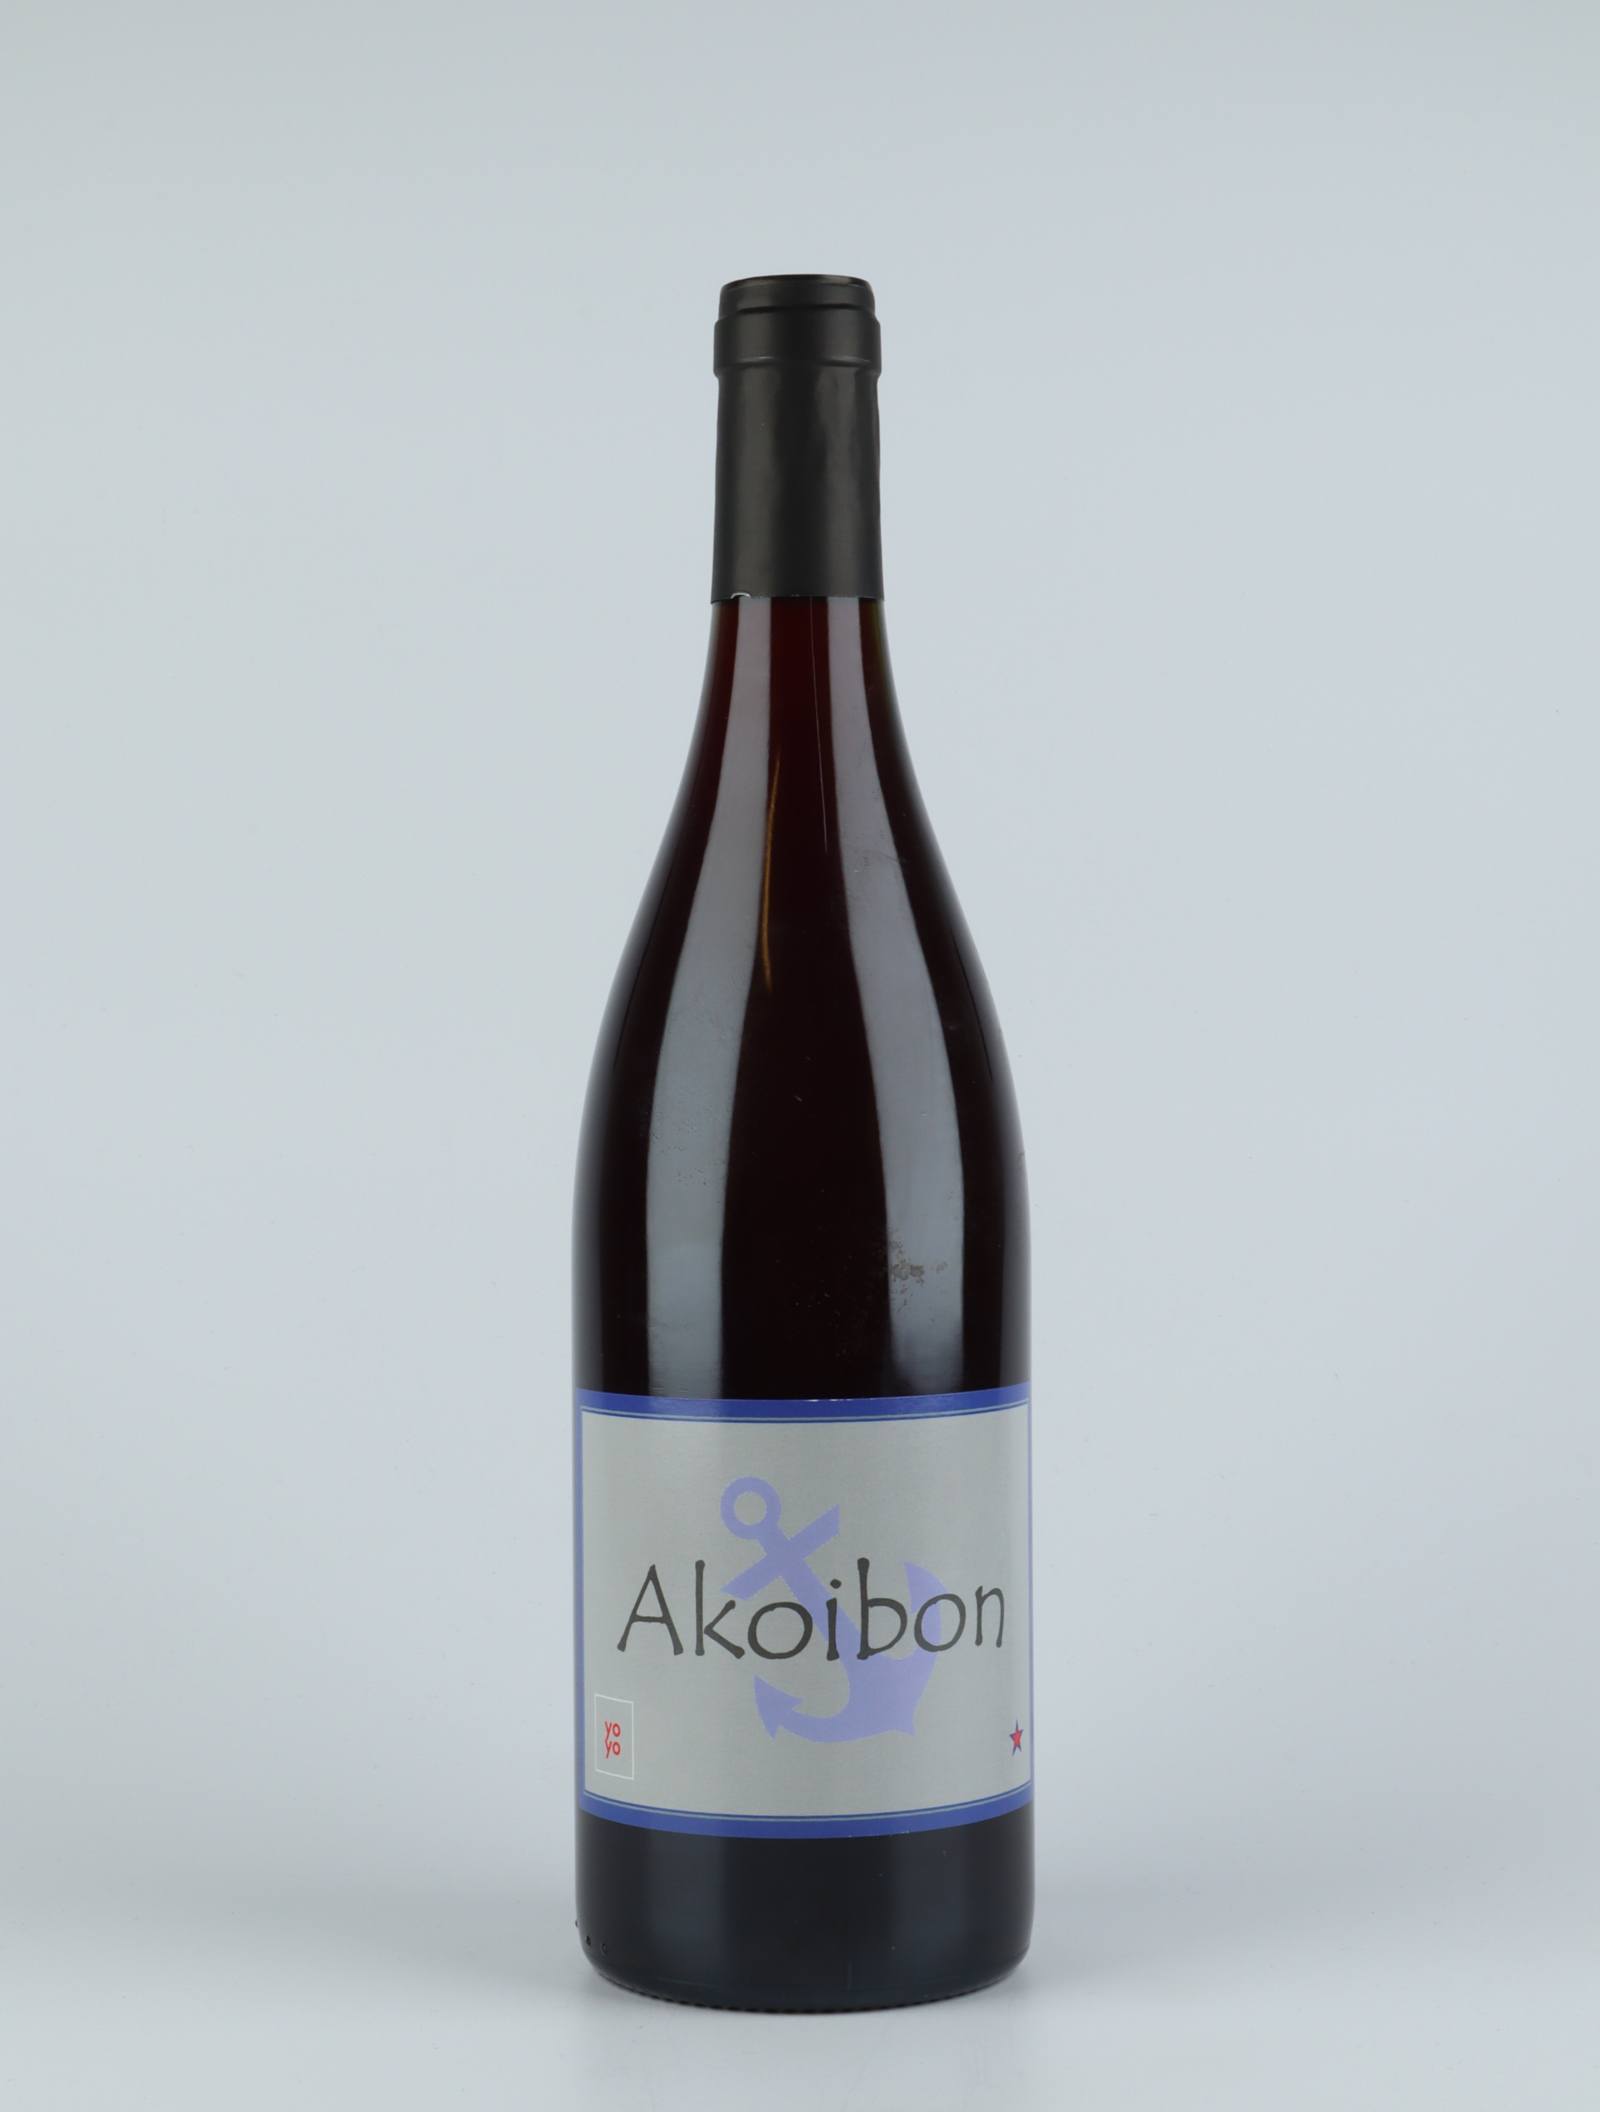 A bottle 2019 Akoibon Red wine from Domaine Yoyo, Rousillon in France